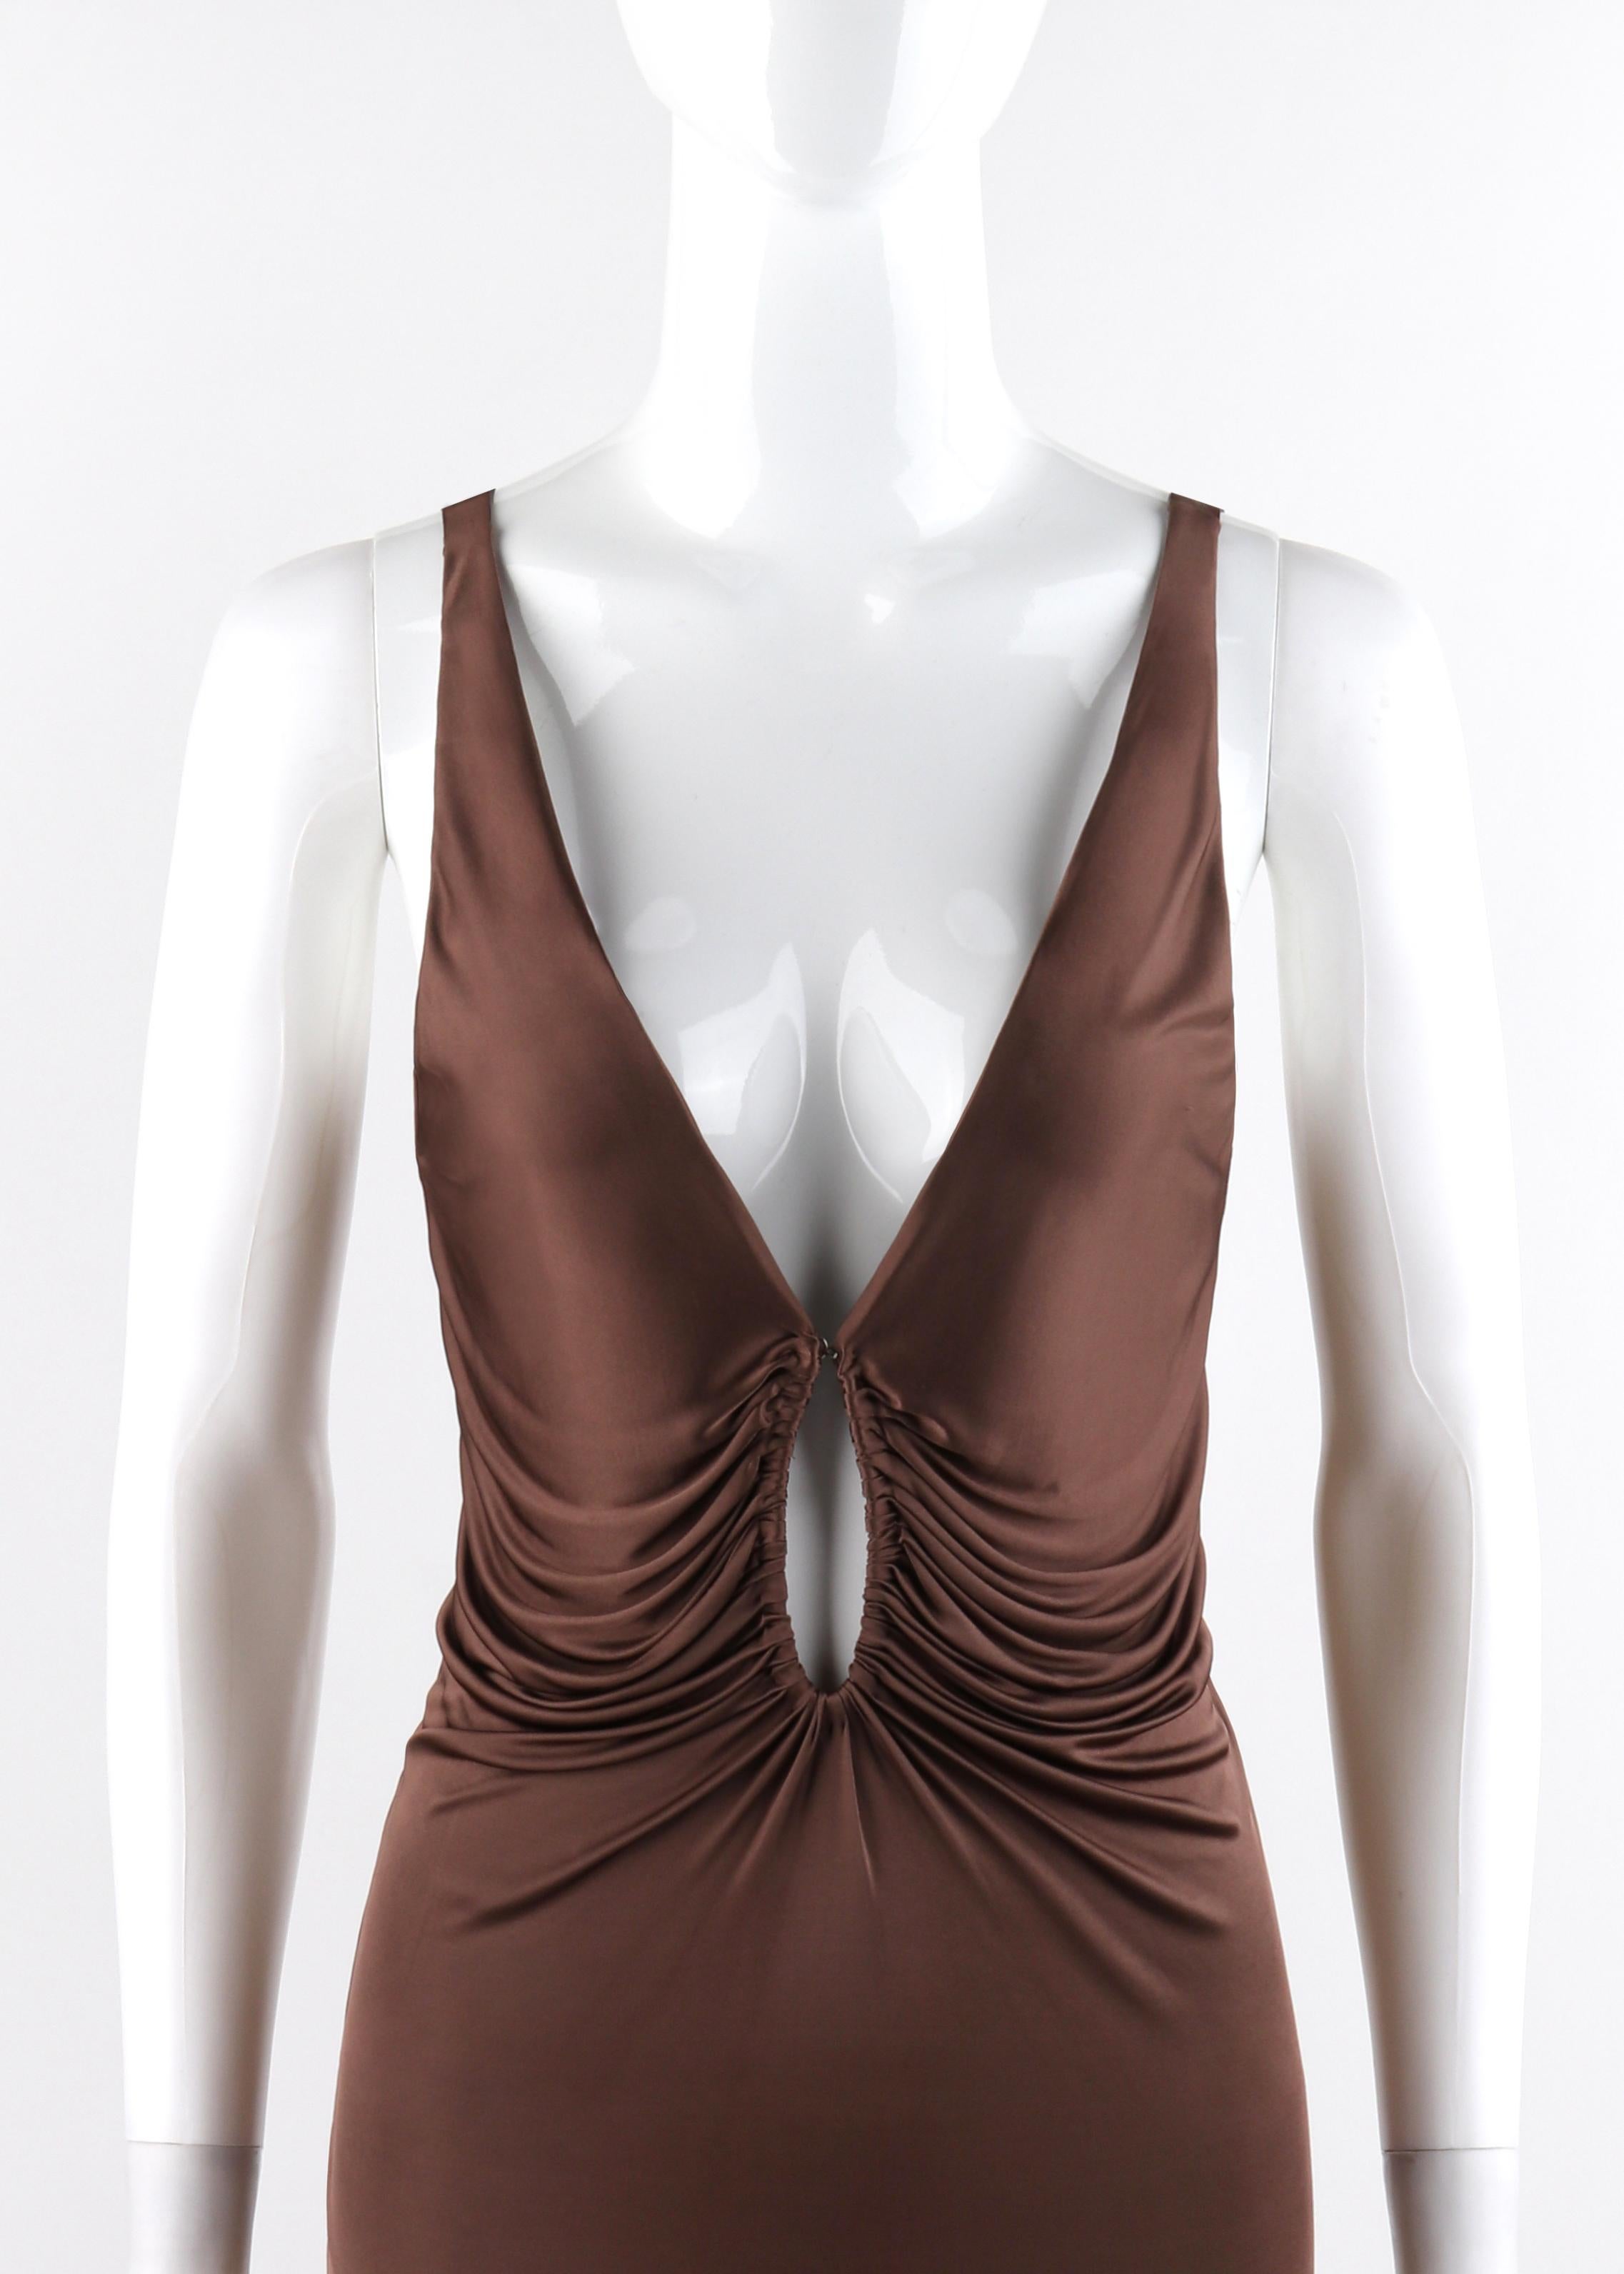 Black ALEXANDER McQUEEN S/S 1996 Brown Plunging Keyhole Neck Bodycon Midi Dress For Sale